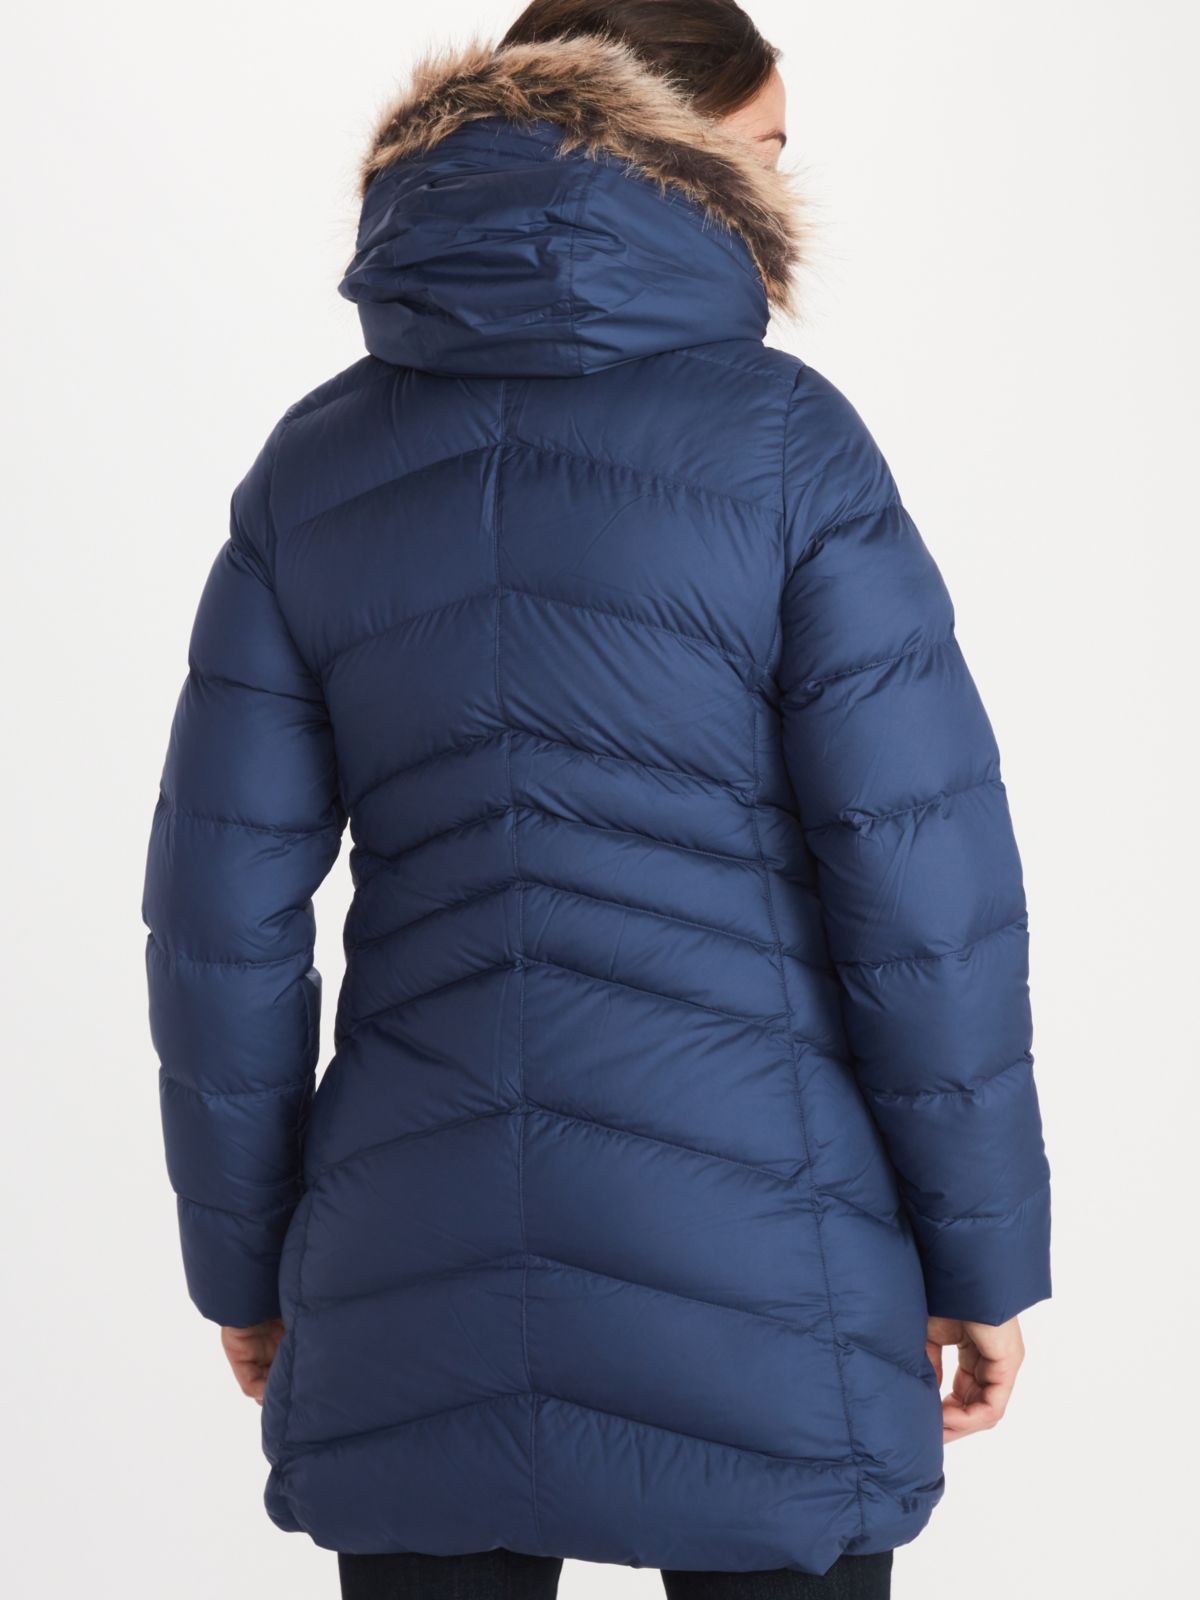 puffy jacket back view